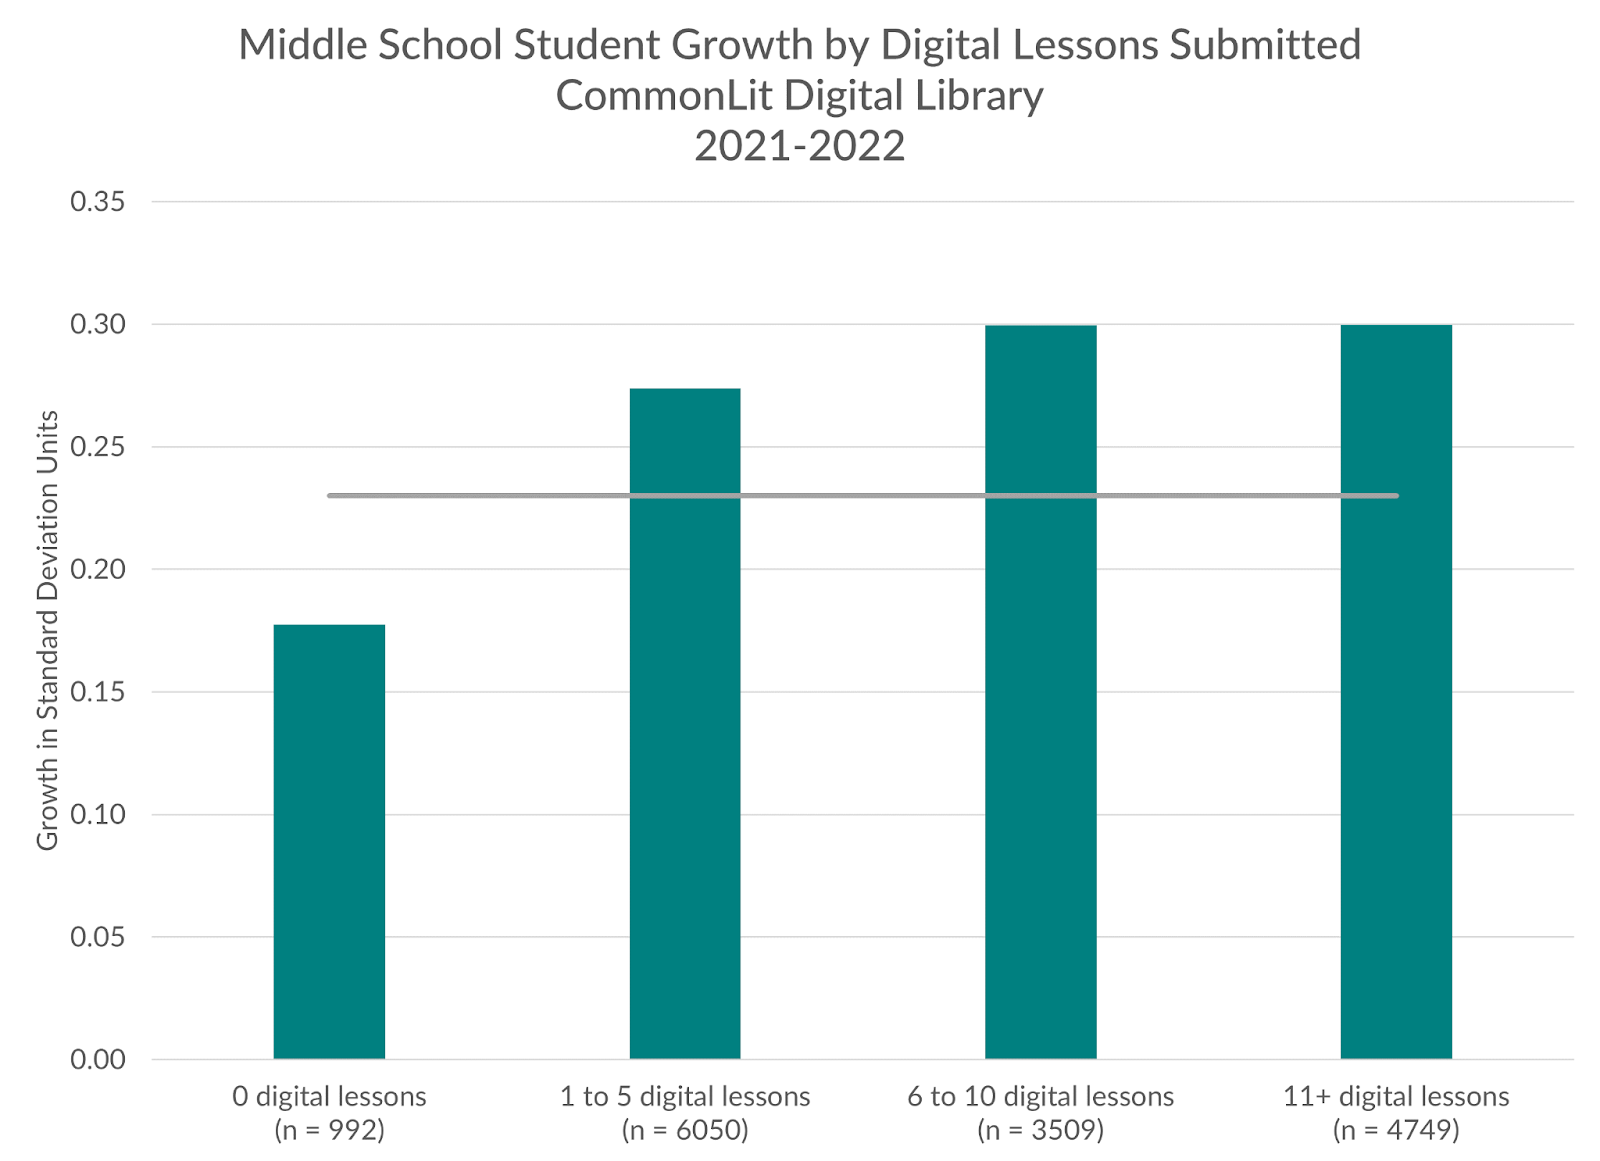 Bar graph showing middle school student growth by digital lessons submitted in the CommonLit digital library